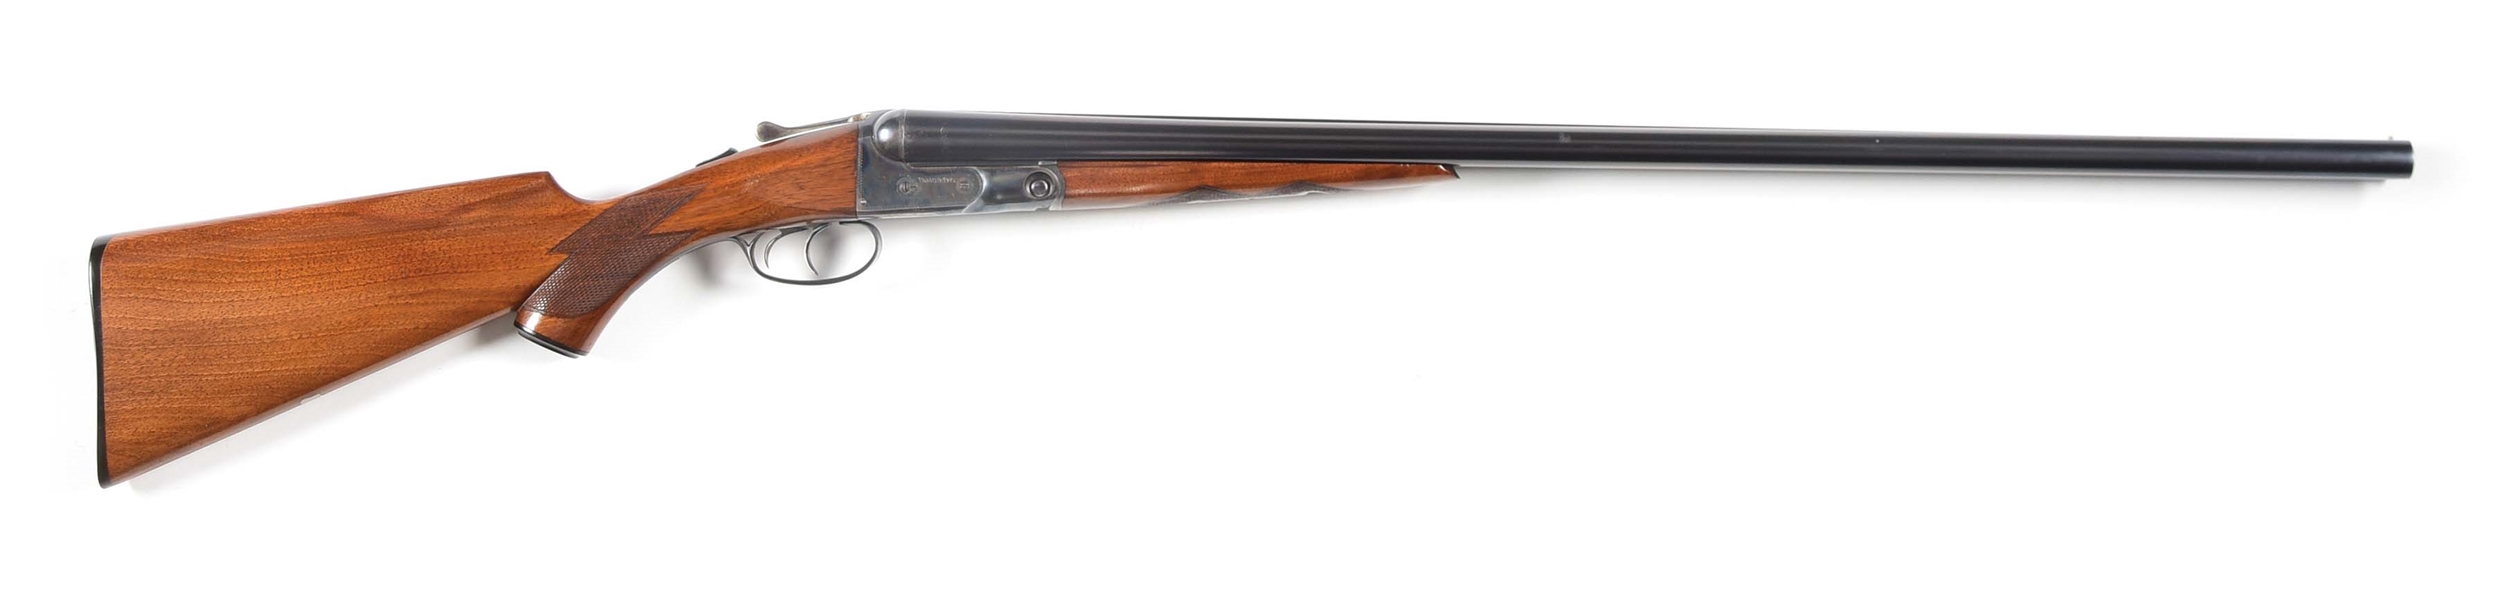 (C) EXTREMELY FINE HIGH ORIGINAL CONDITION PARKER VHE GRADE 12 BORE SIDE BY SIDE SHOTGUN.